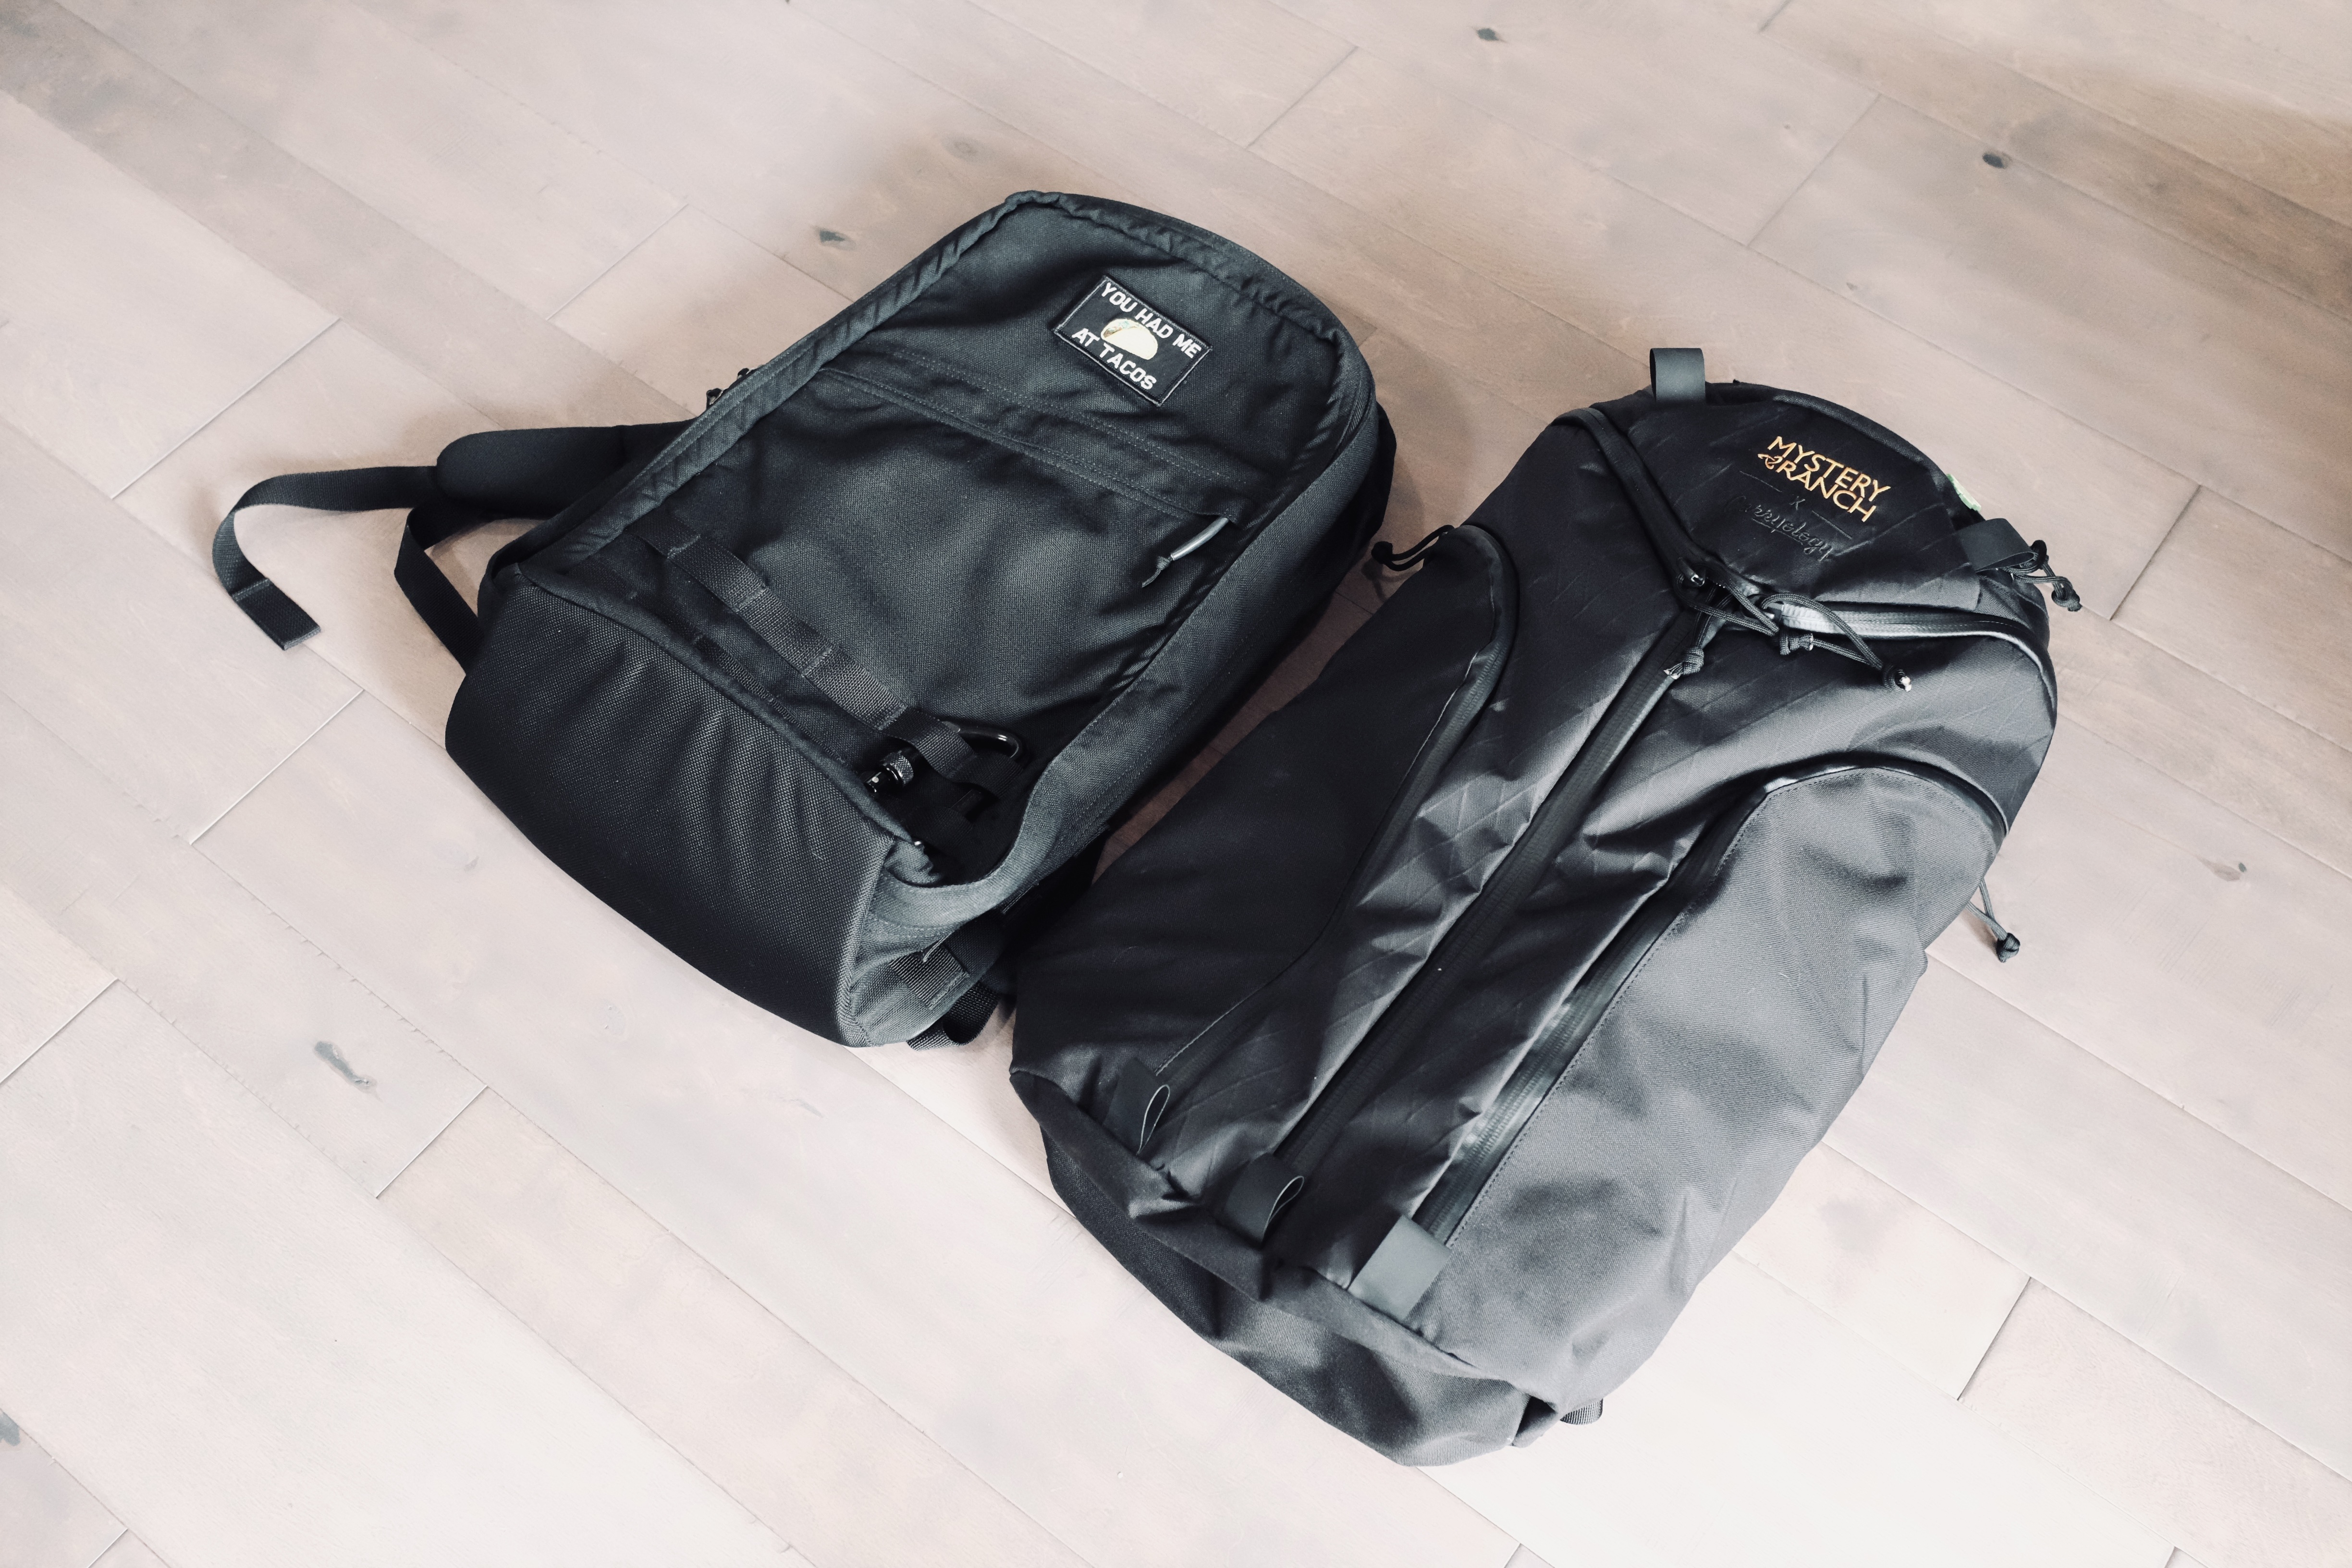 Trying to Score a Limited Edition Unicorn 2.0 - Carryology X Mystery Ranch  